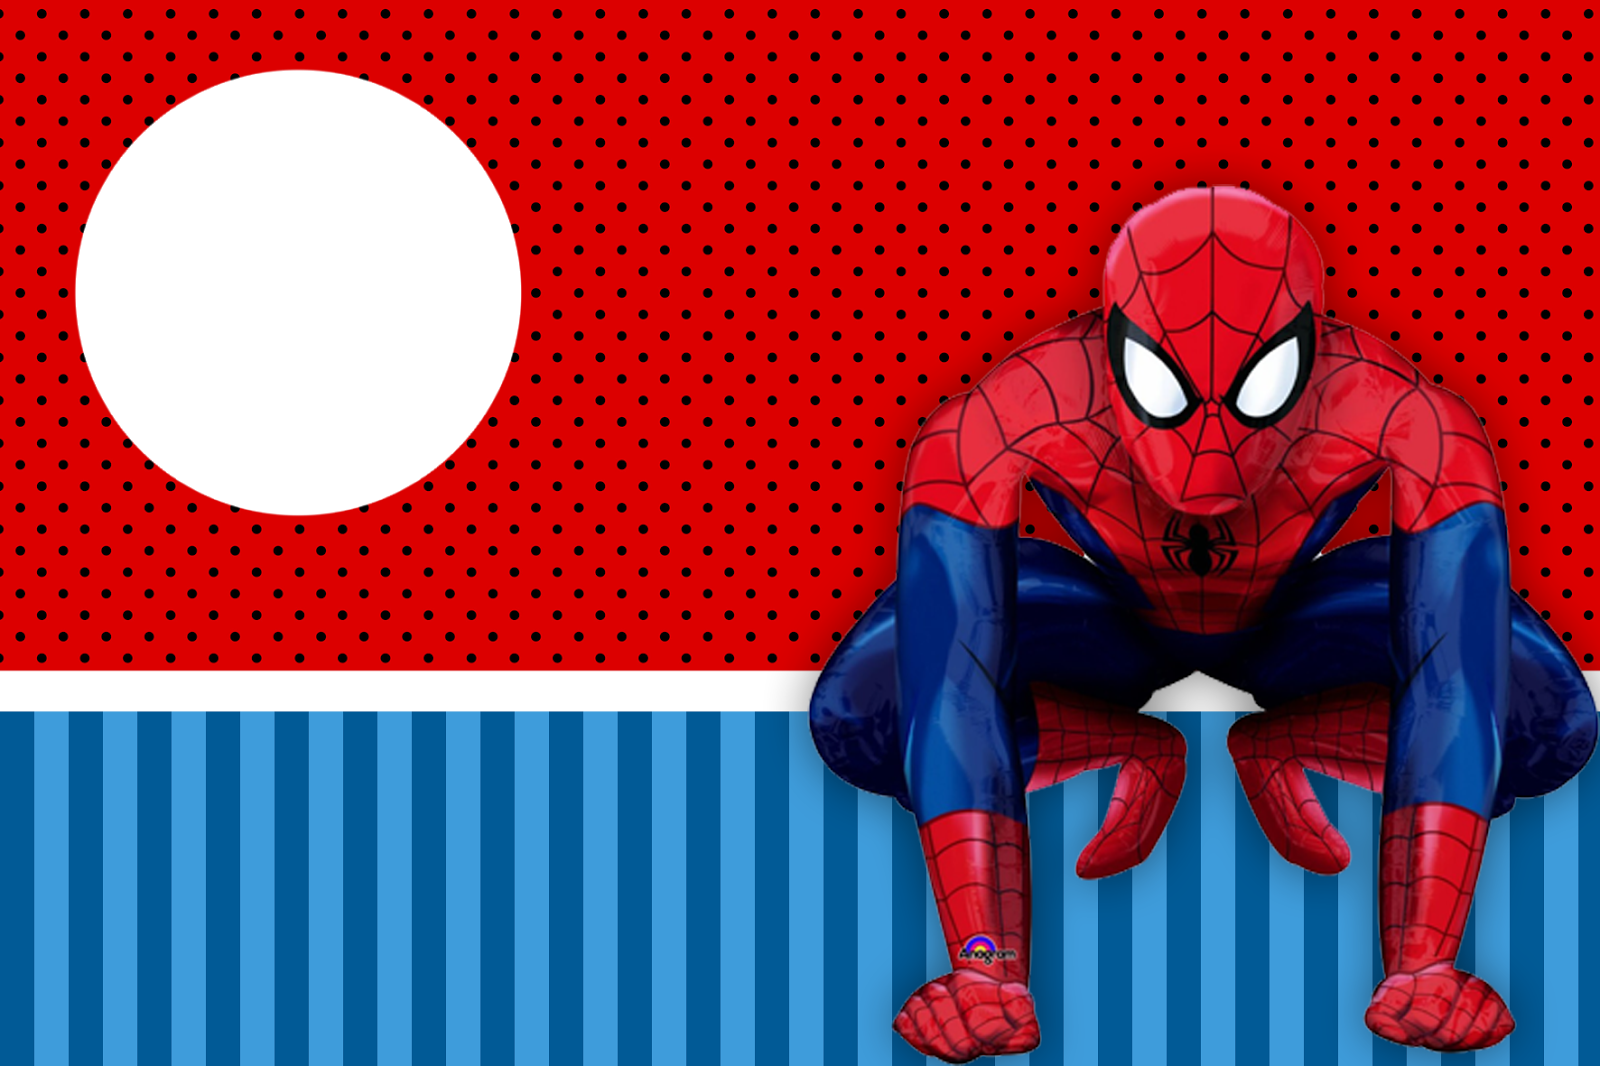 Spiderman Party: Free Printable Invitations. - Oh My Fiesta! for Geeks